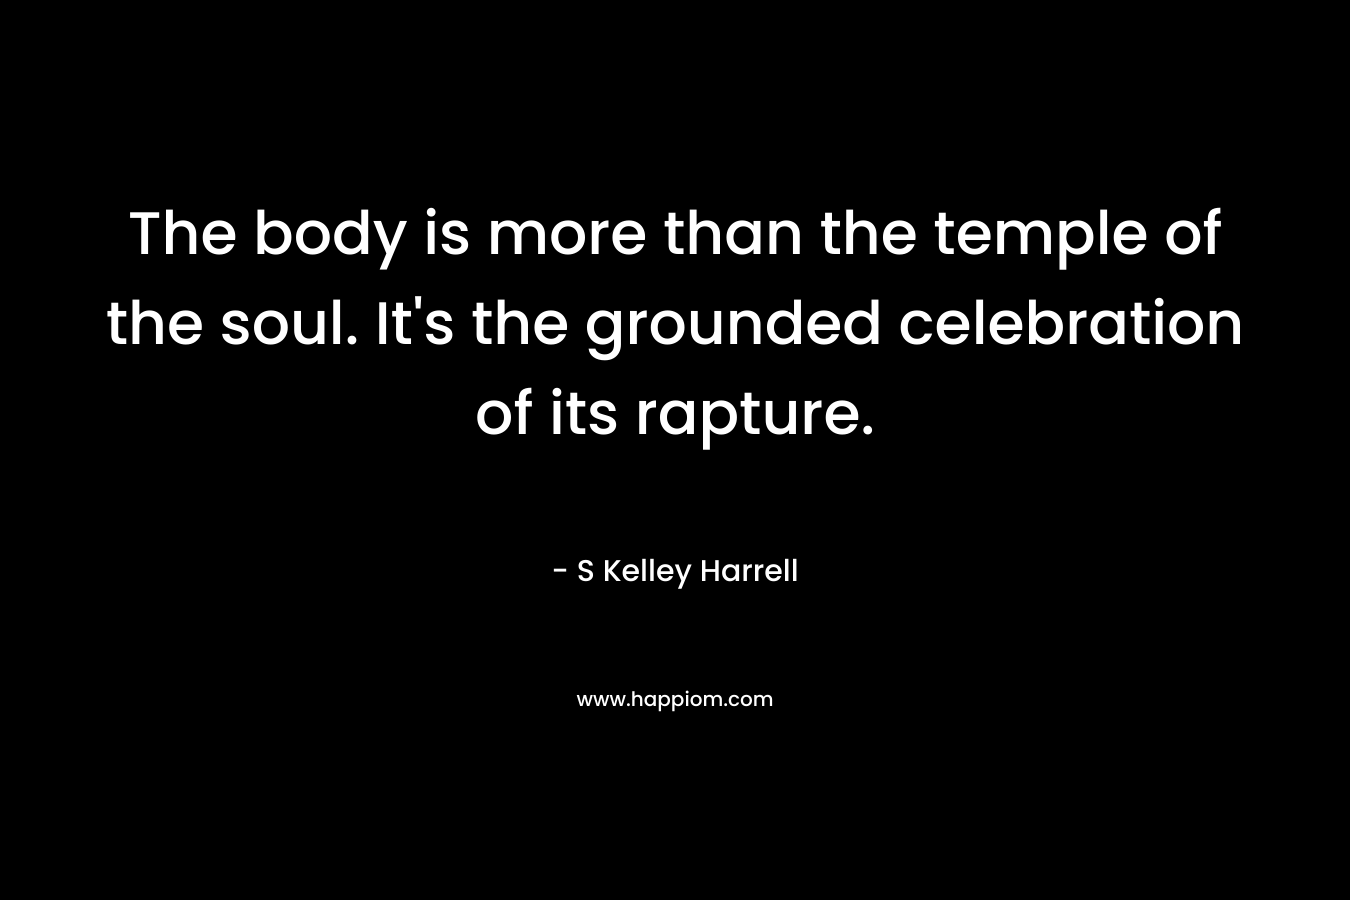 The body is more than the temple of the soul. It’s the grounded celebration of its rapture. – S Kelley Harrell